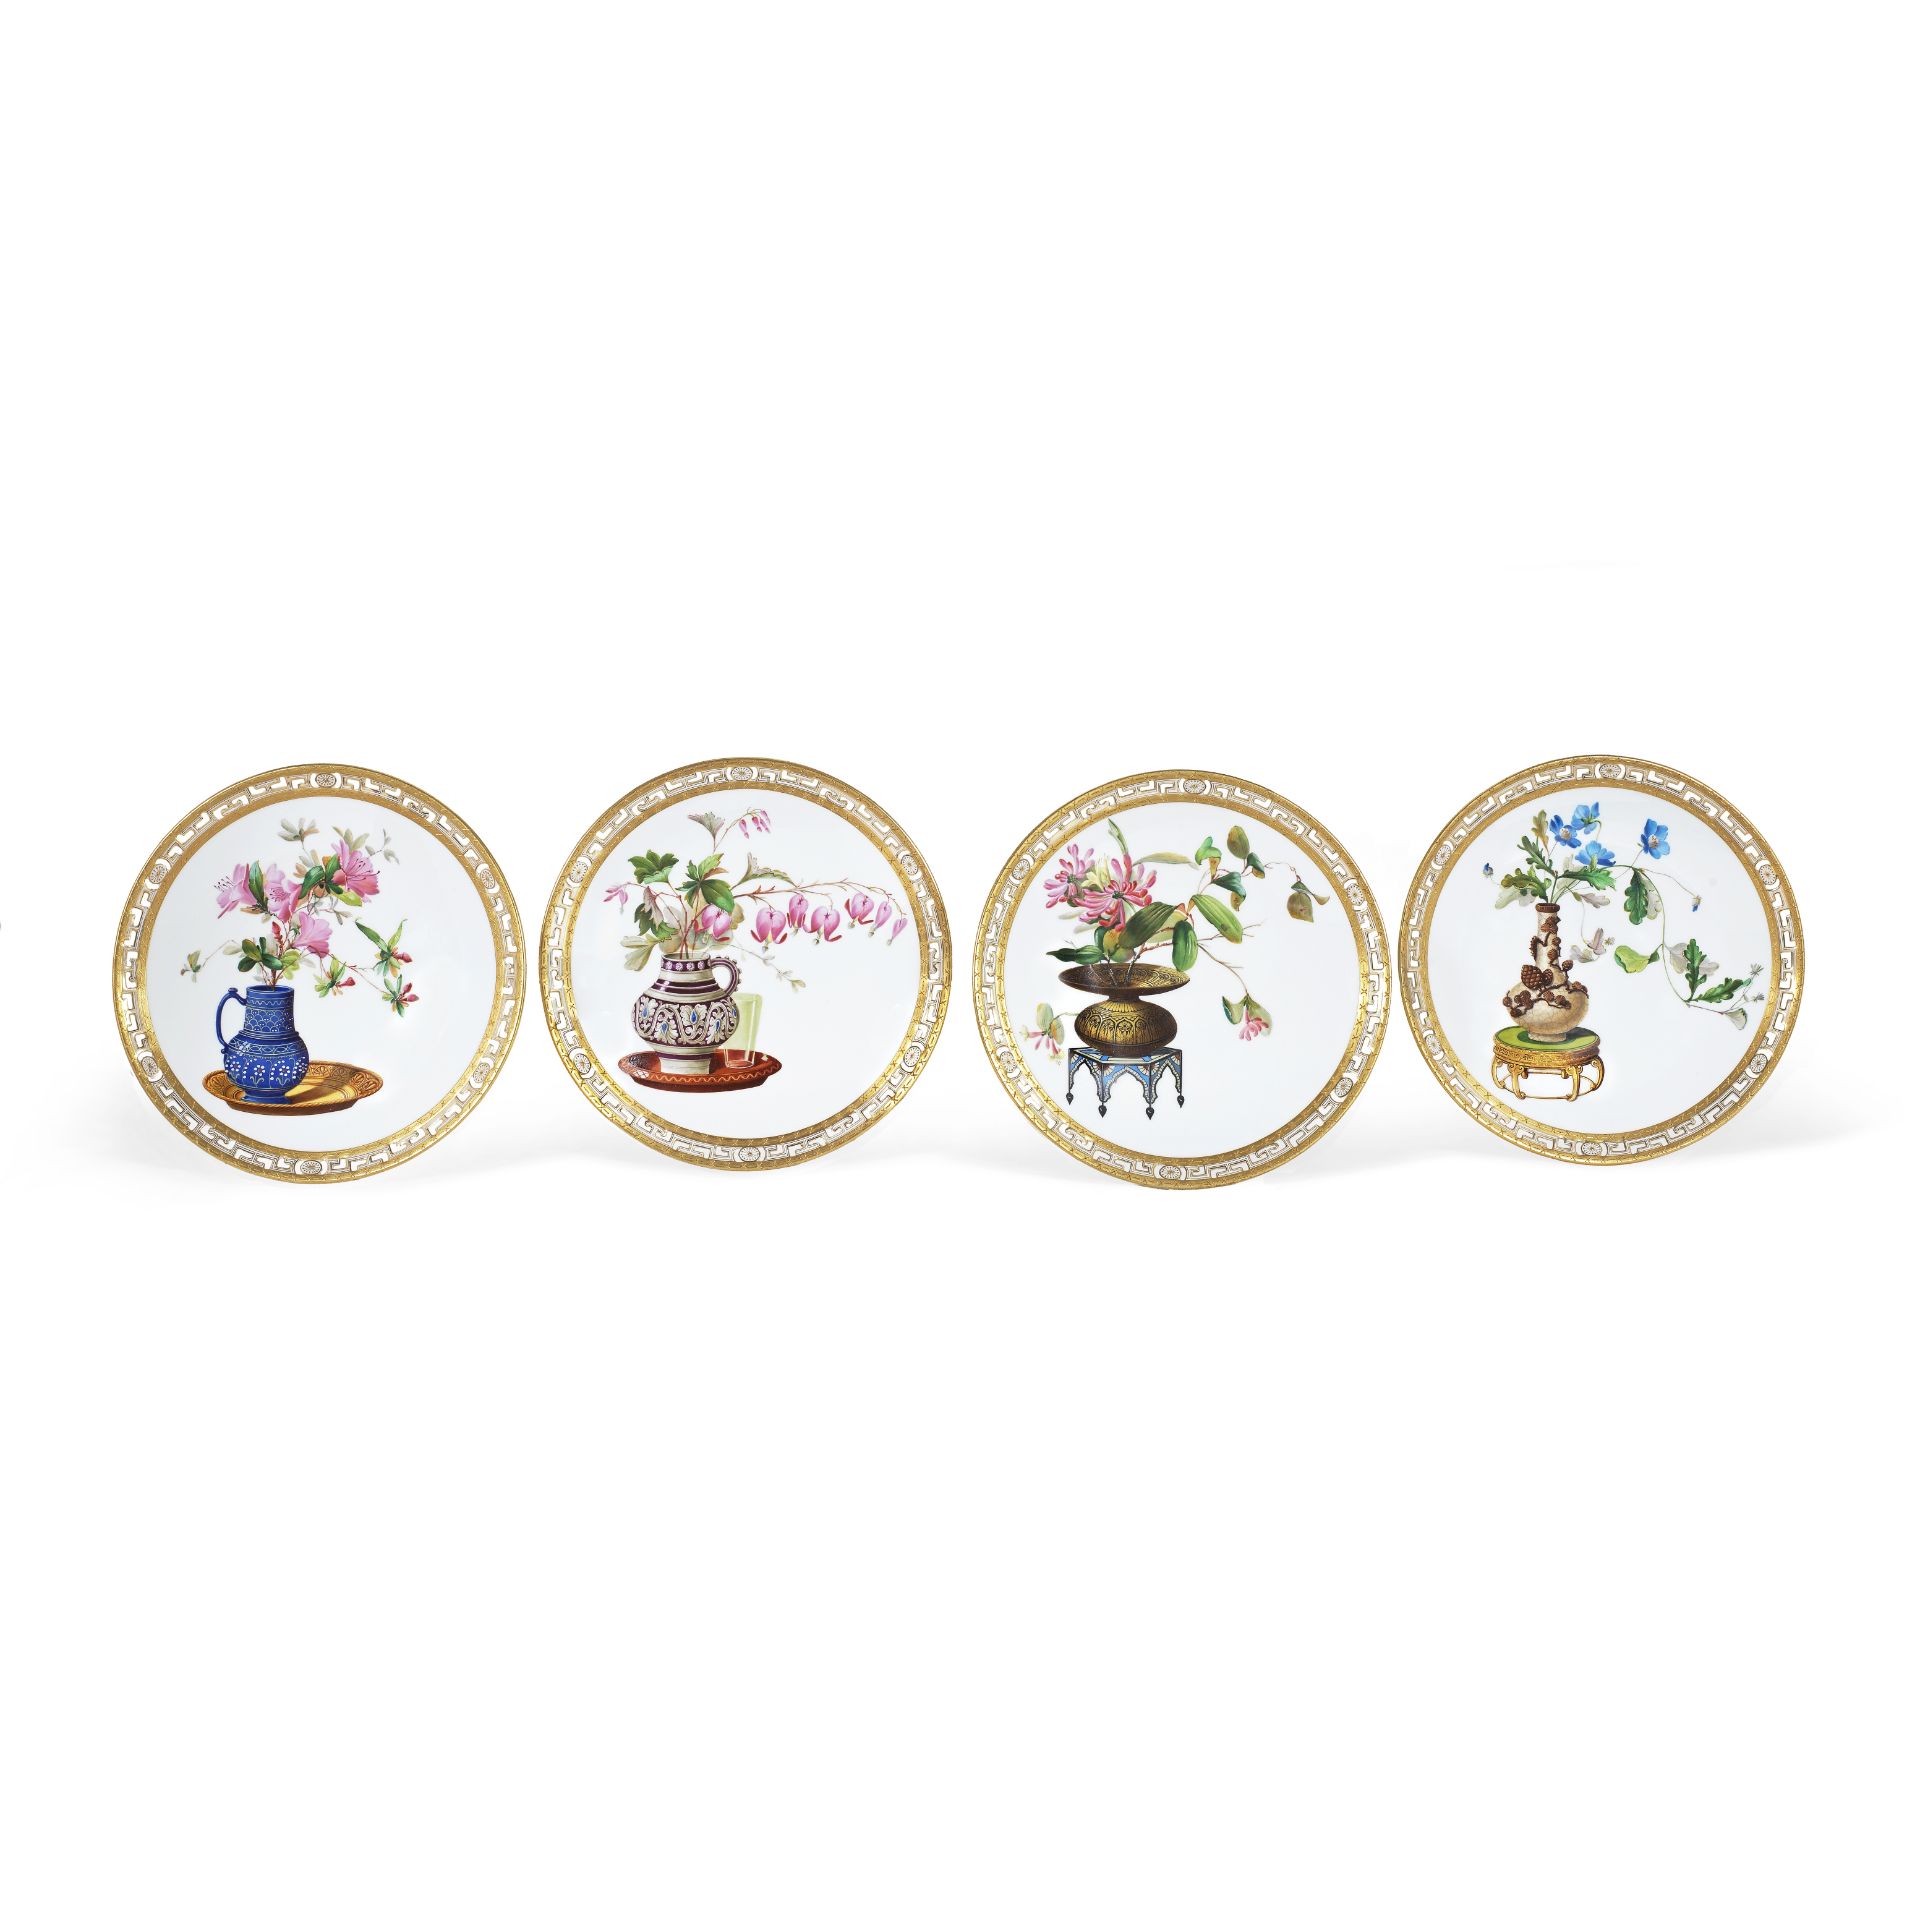 A part set of four late 19th century Minton porcelain reticulated plates circa 1880